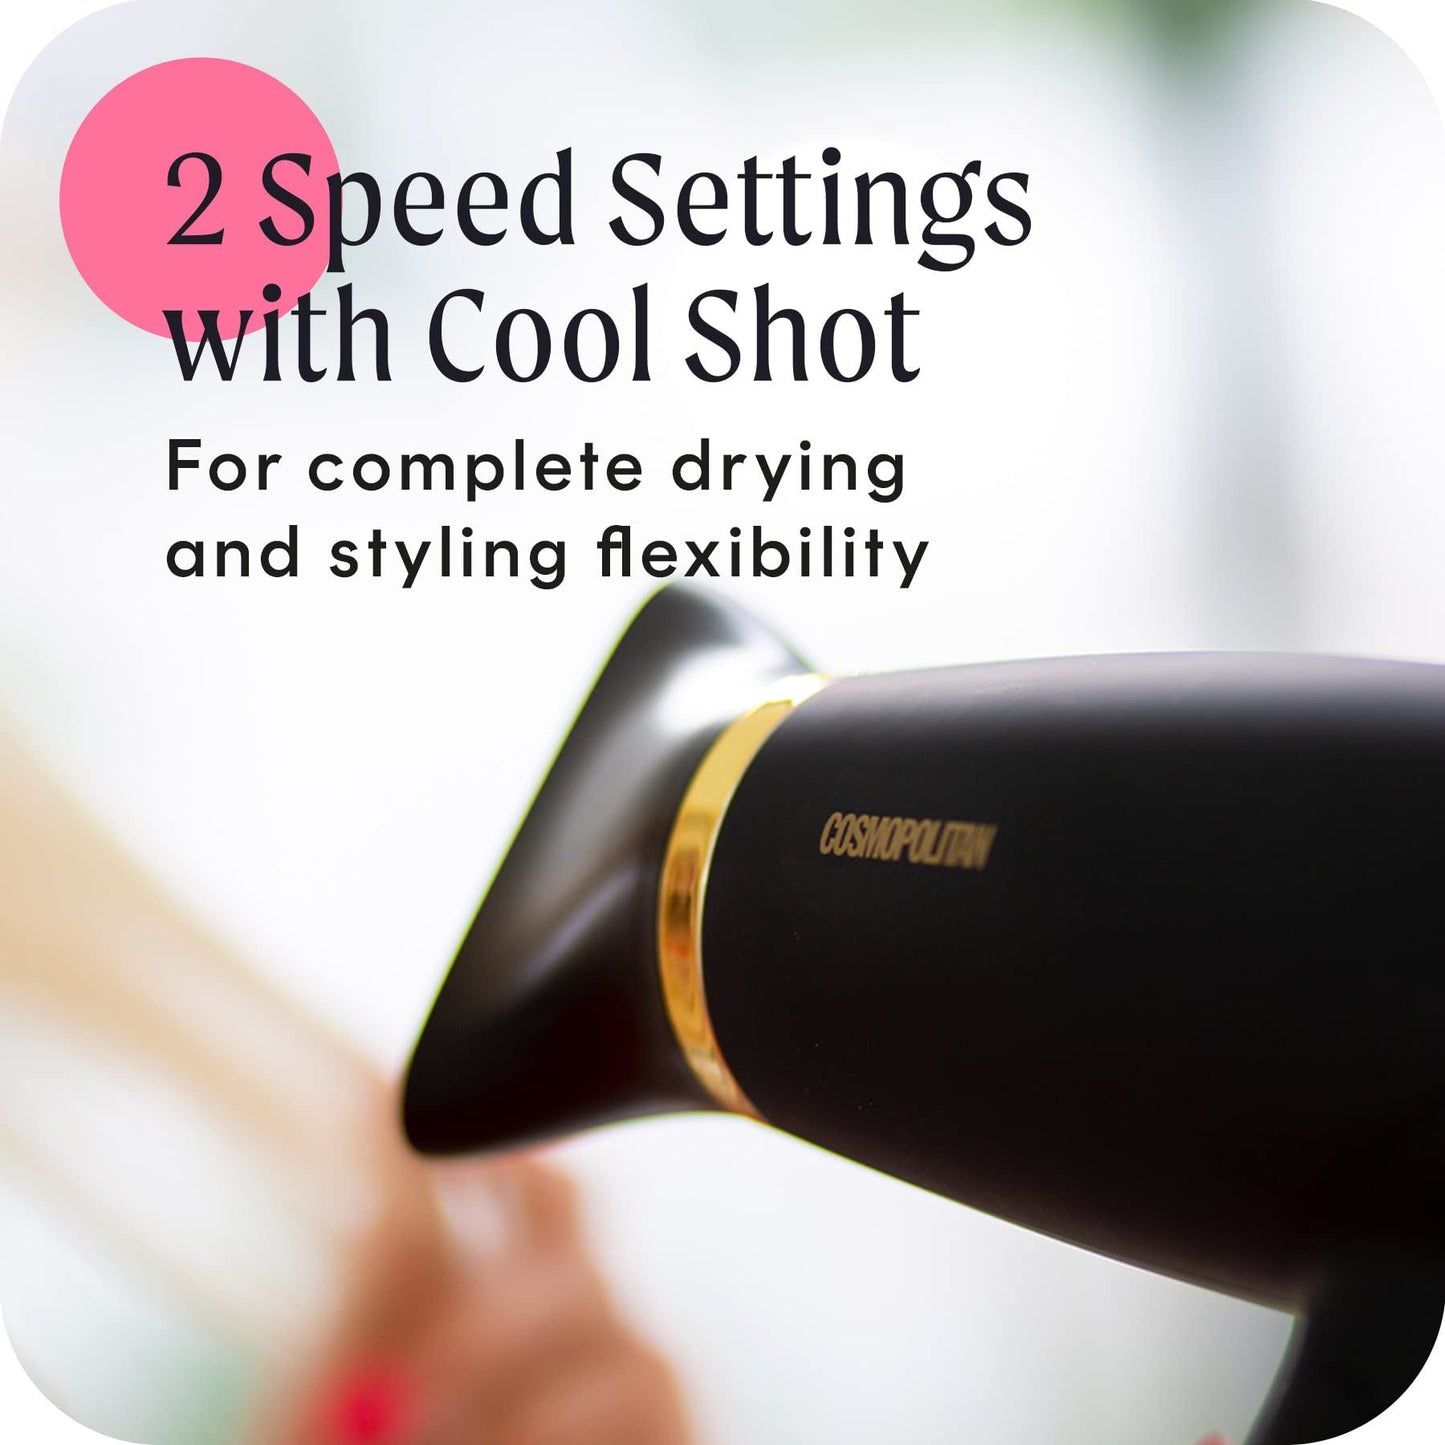 Cosmopolitan Hairdryer for Travel & Home with Foldable Handle, Full Size Portable Hair Dryer, 2 Speed Settings, Powerful High Speed Blow Dryer, Beauty & Personal Care Tool, 1800-2200W - Black & Gold